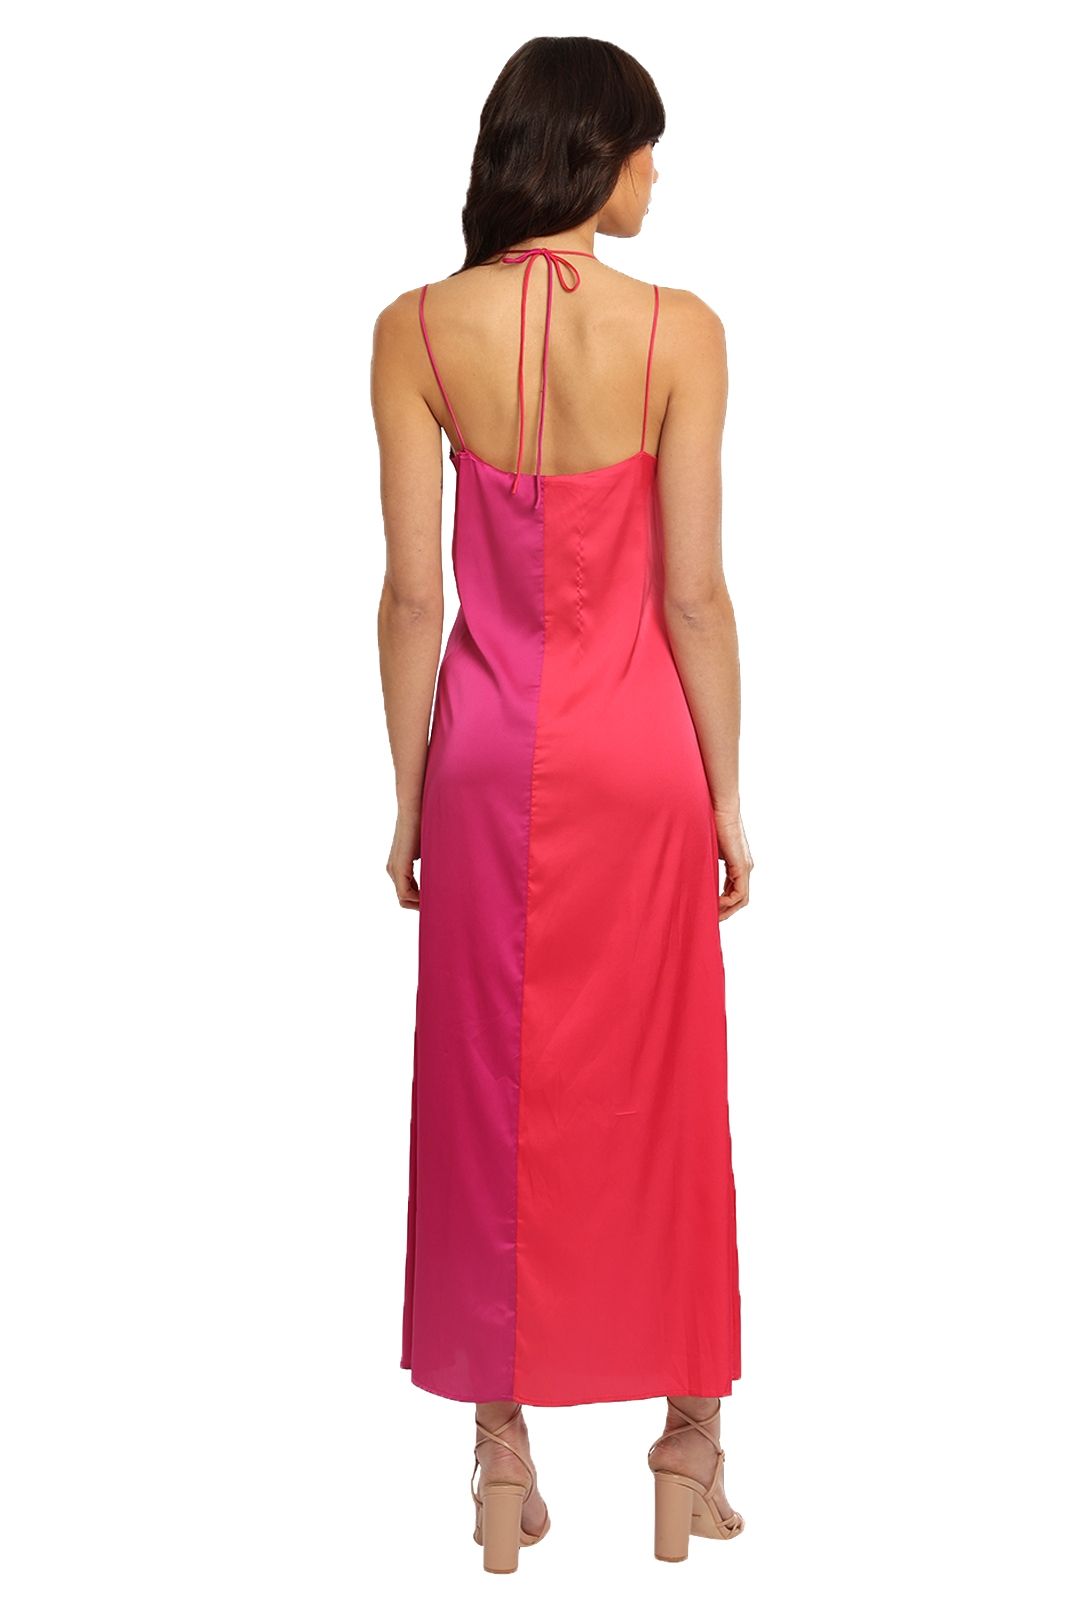 Blanca Pisces Dress Red Pink